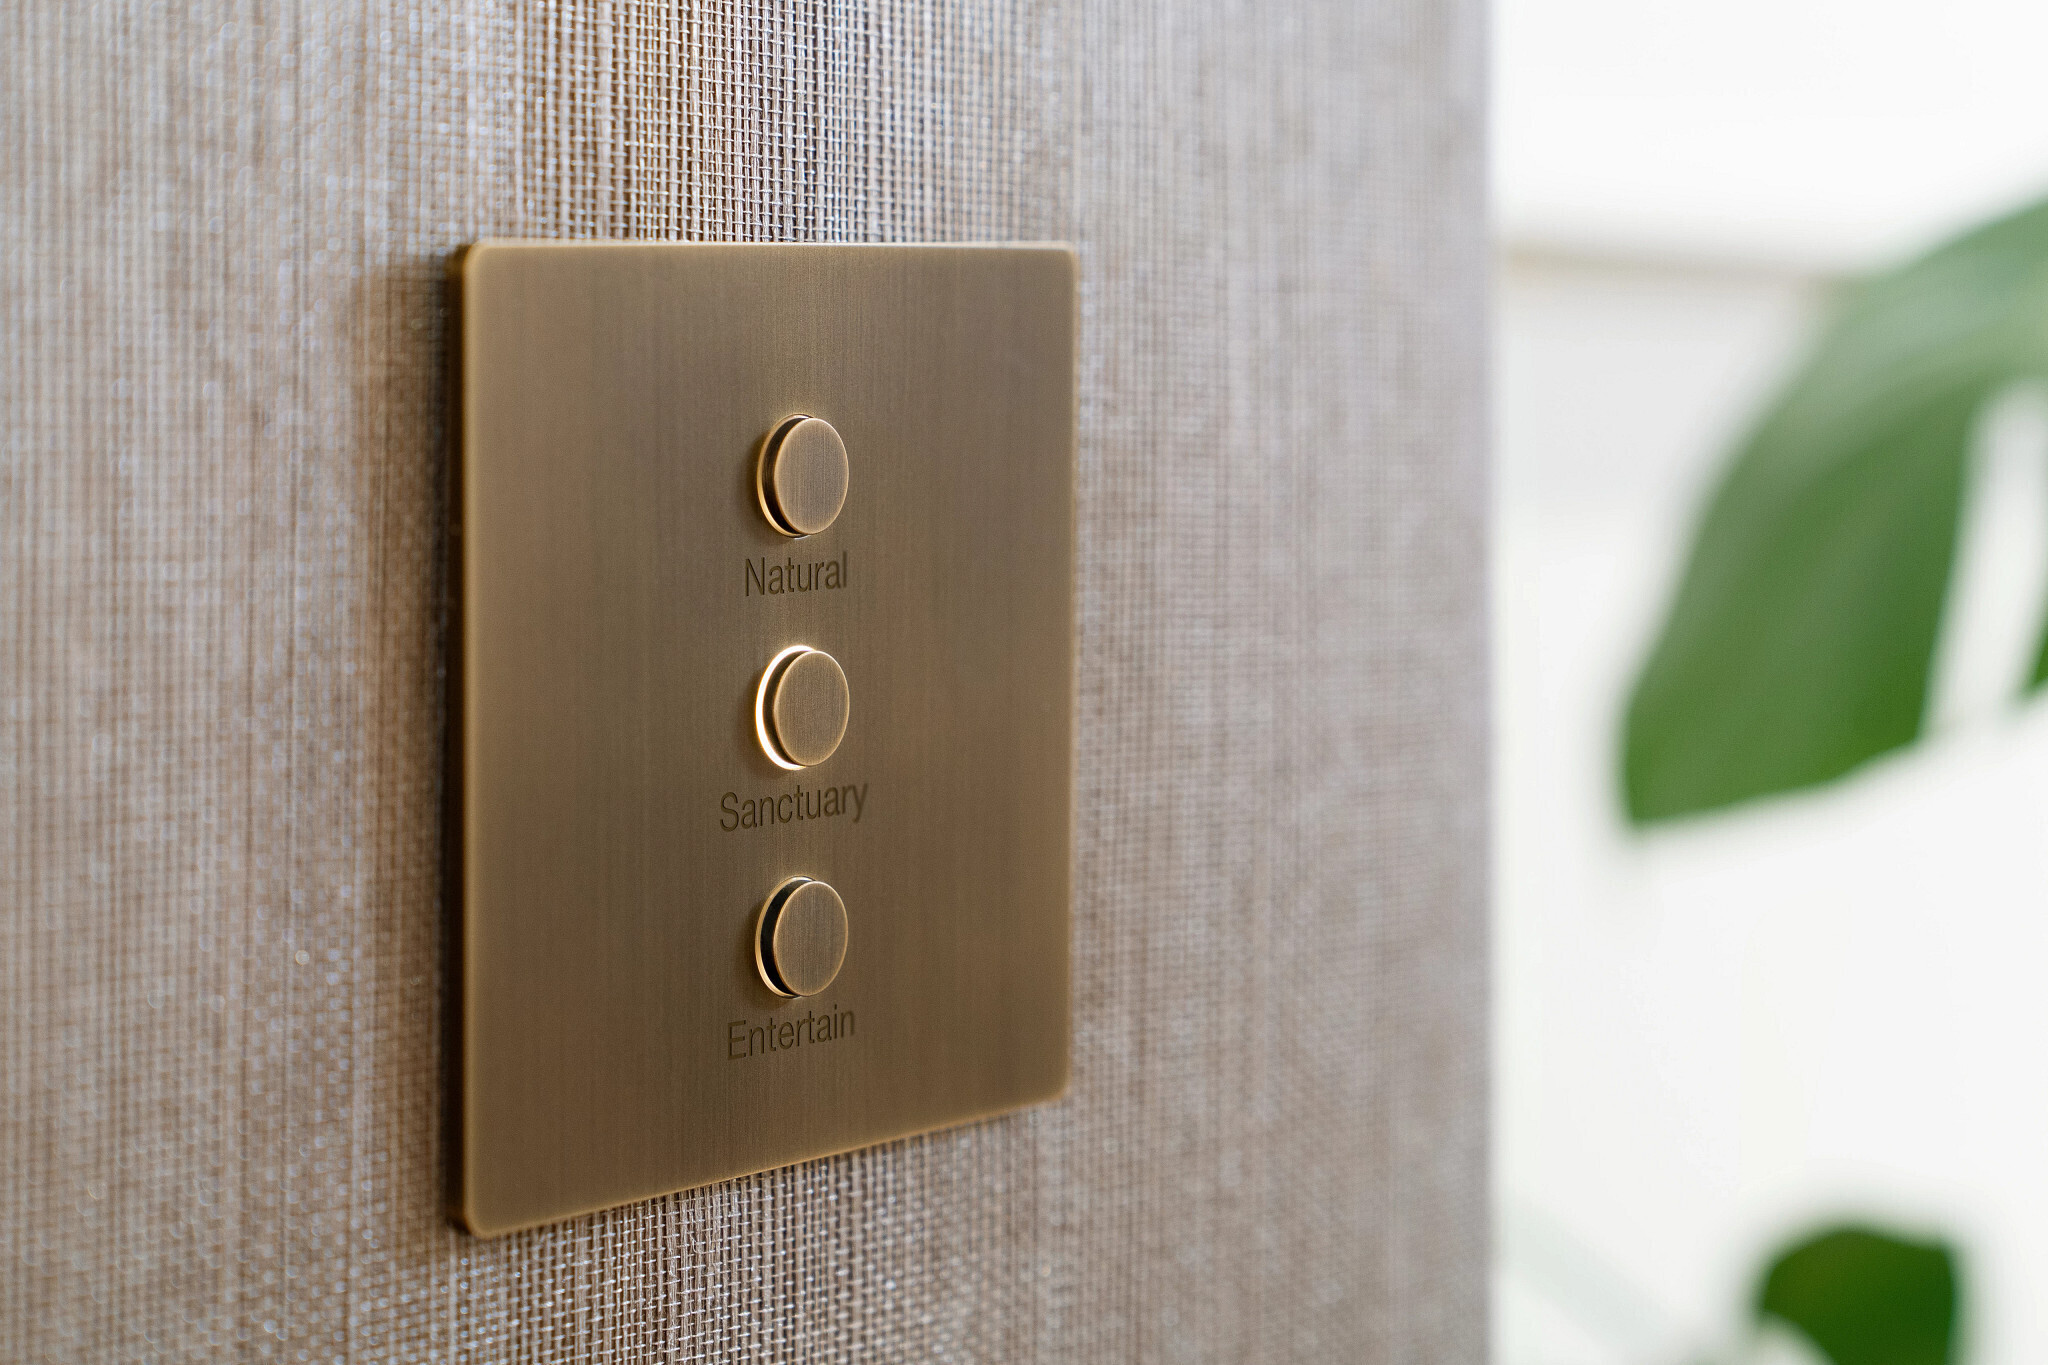 Wall Mounted Bronze Colored Push Button Using Smart Lighting Control